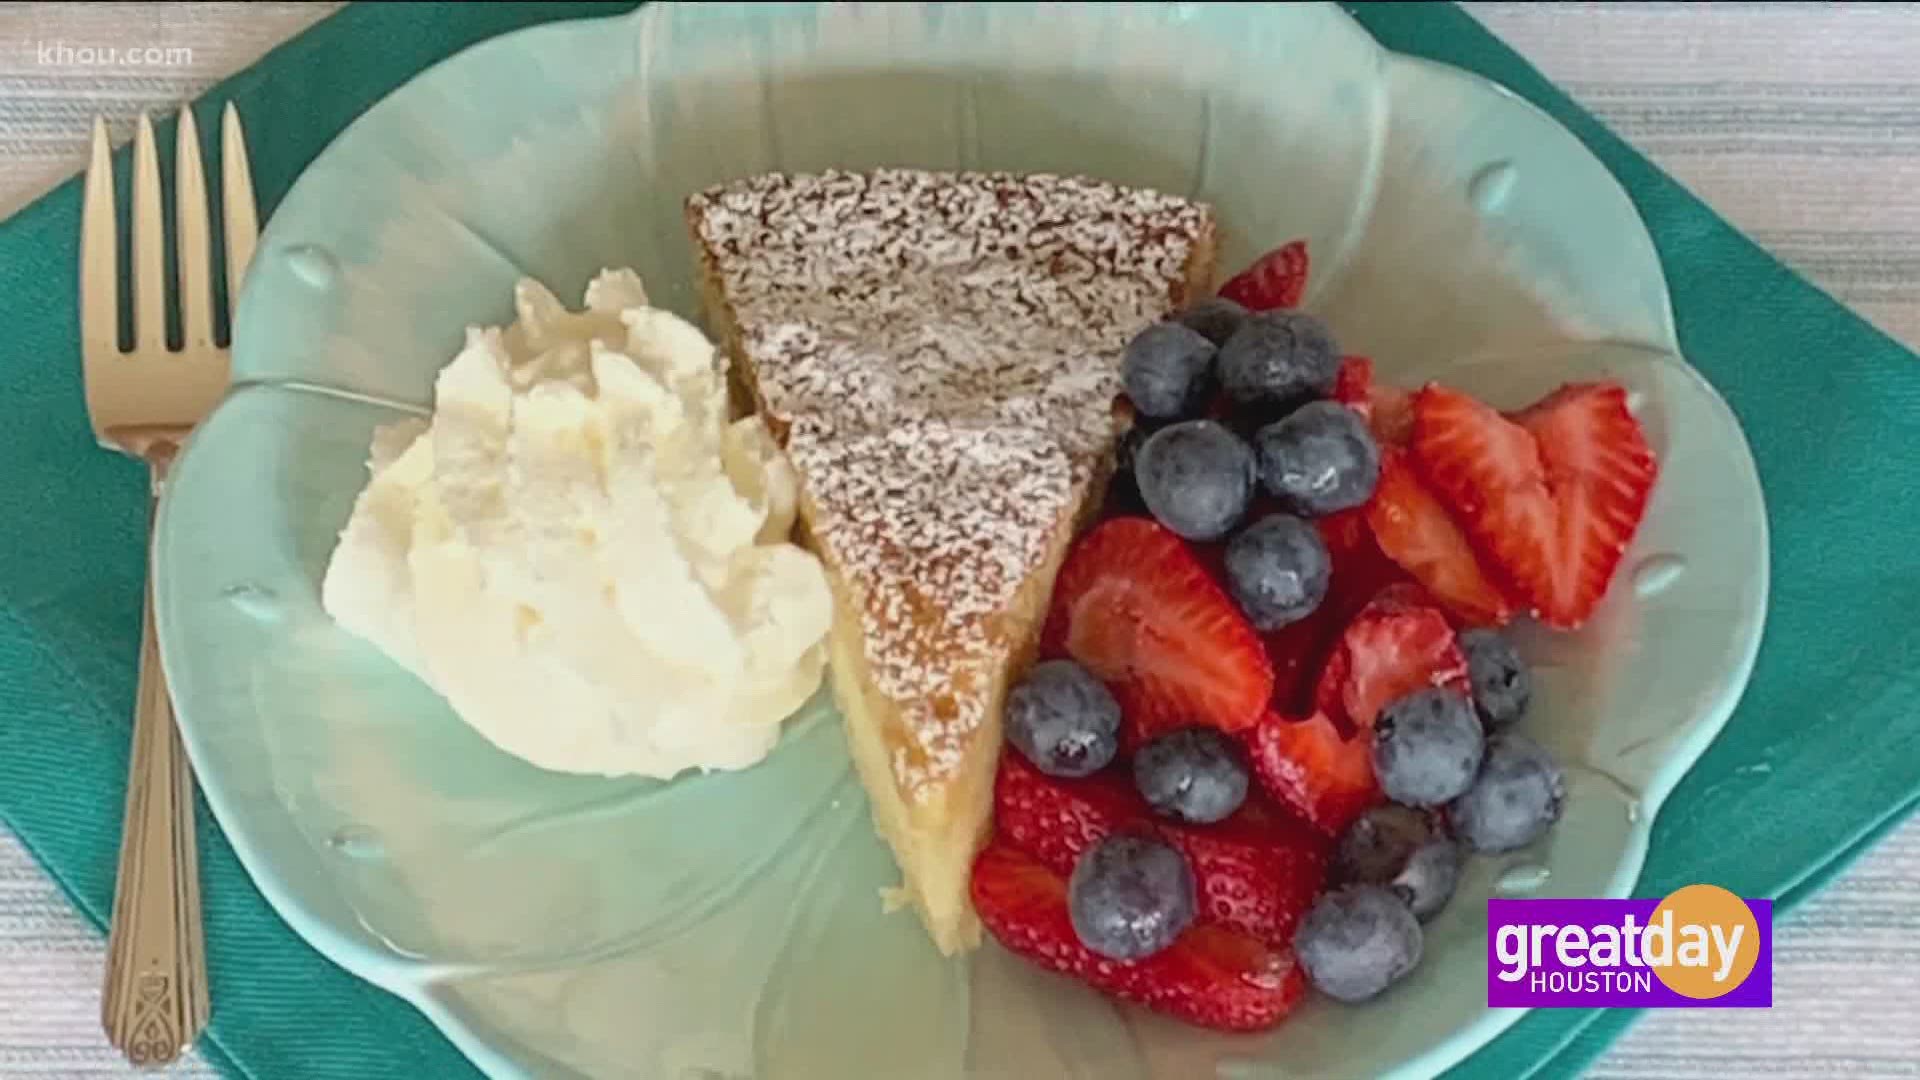 Chef and Cookbook Author, Christy Rost, shares her recipe for Hot Milk Cakes.